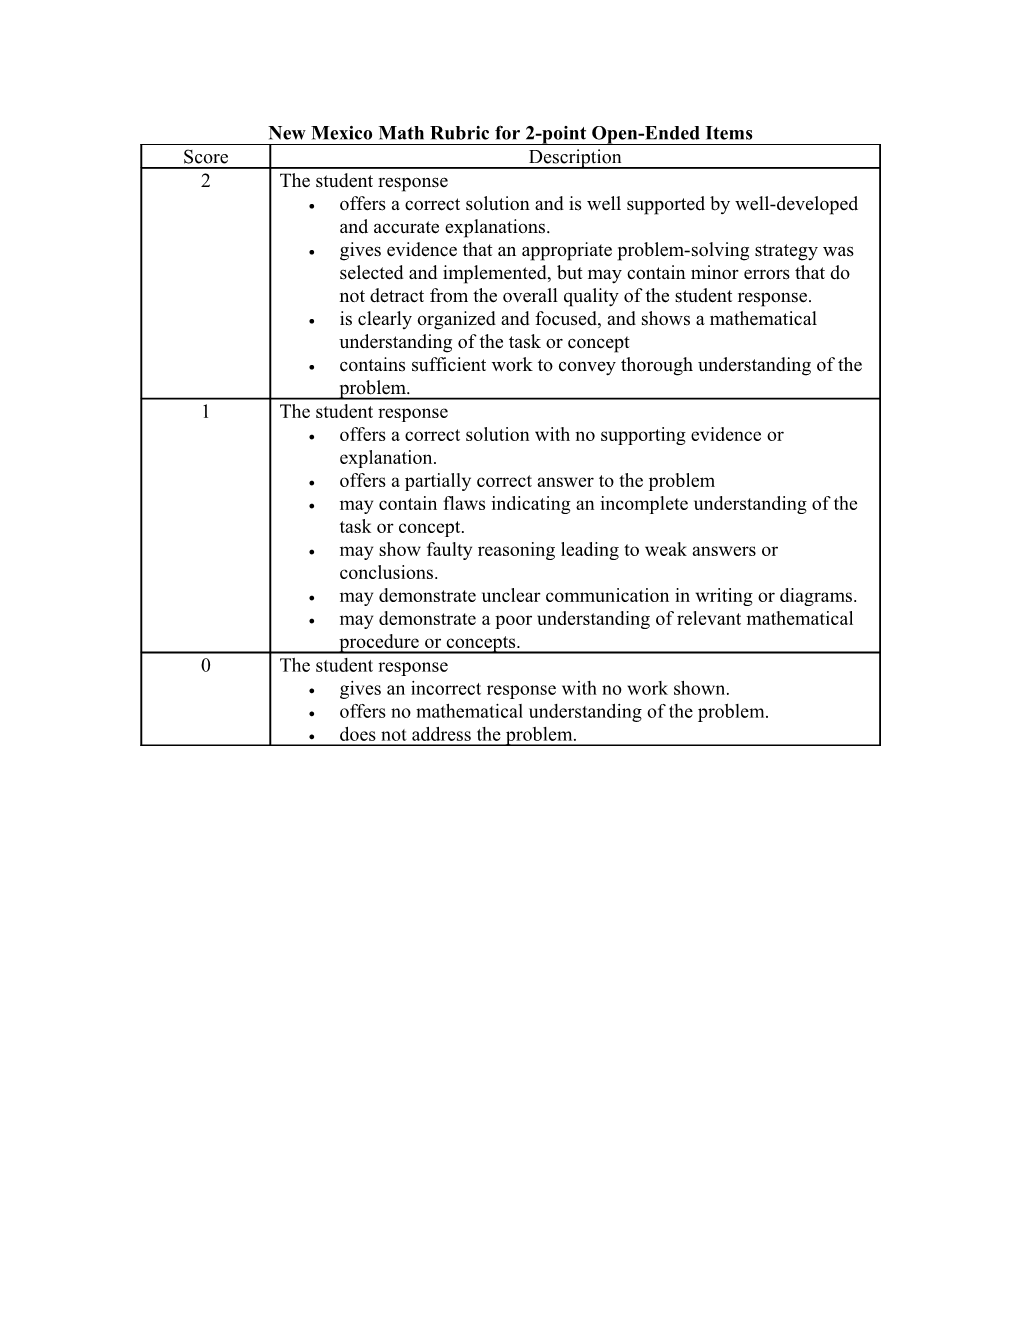 New Mexico Math Rubric for 2-Point Open-Ended Items